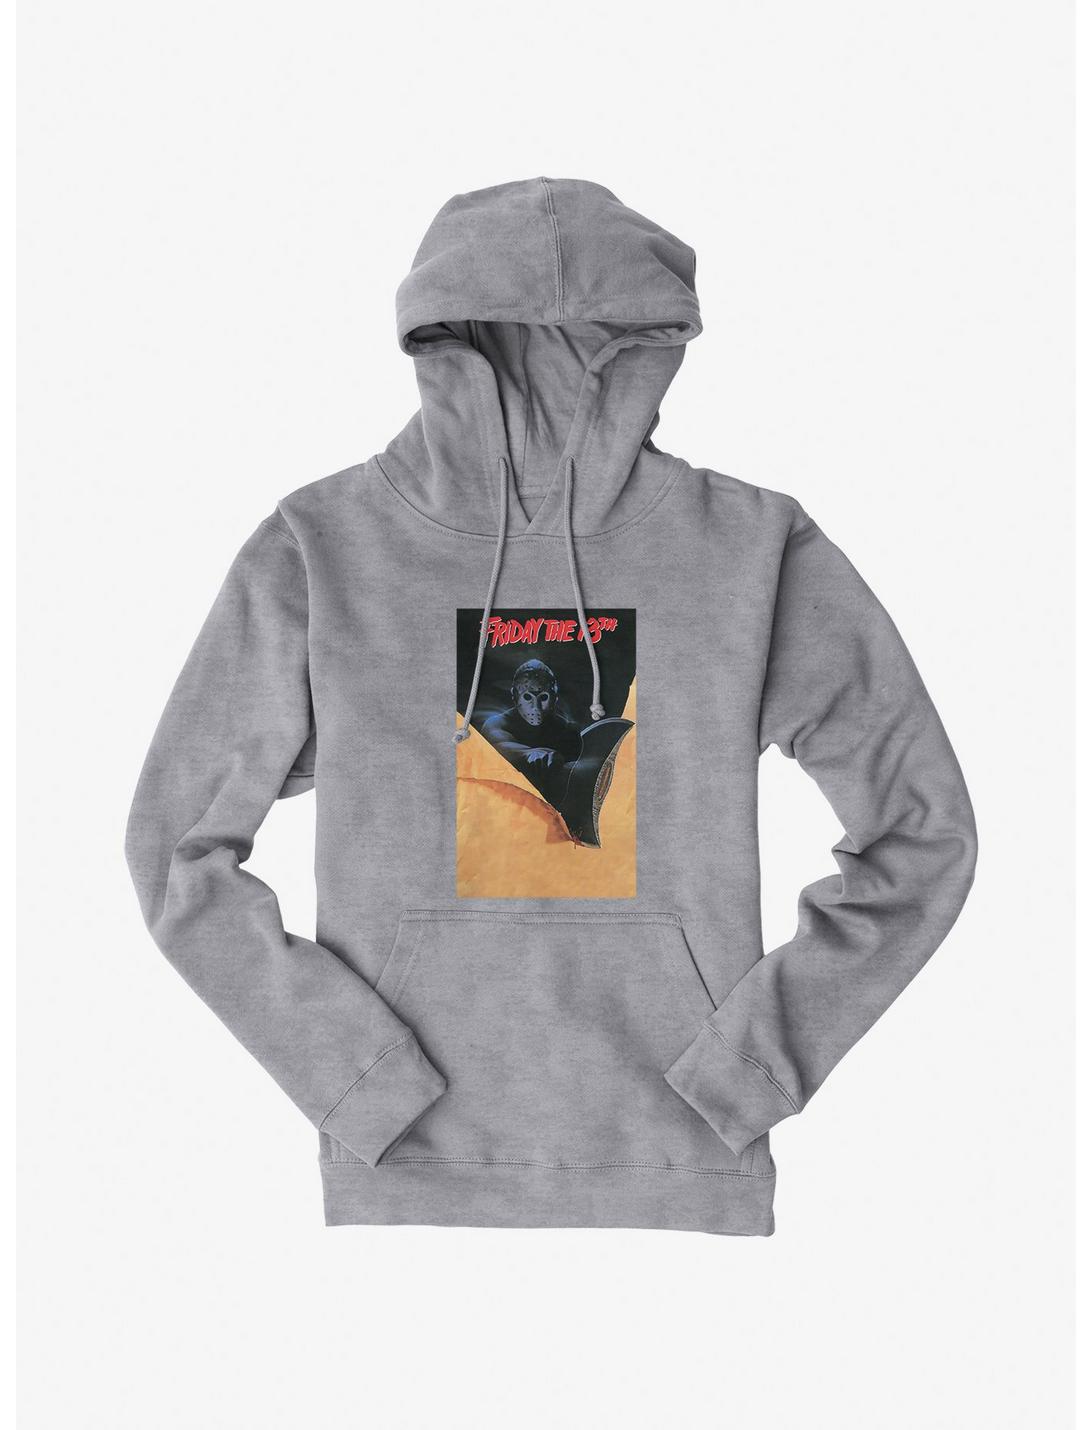 Friday The 13th Poster Hoodie, HEATHER GREY, hi-res